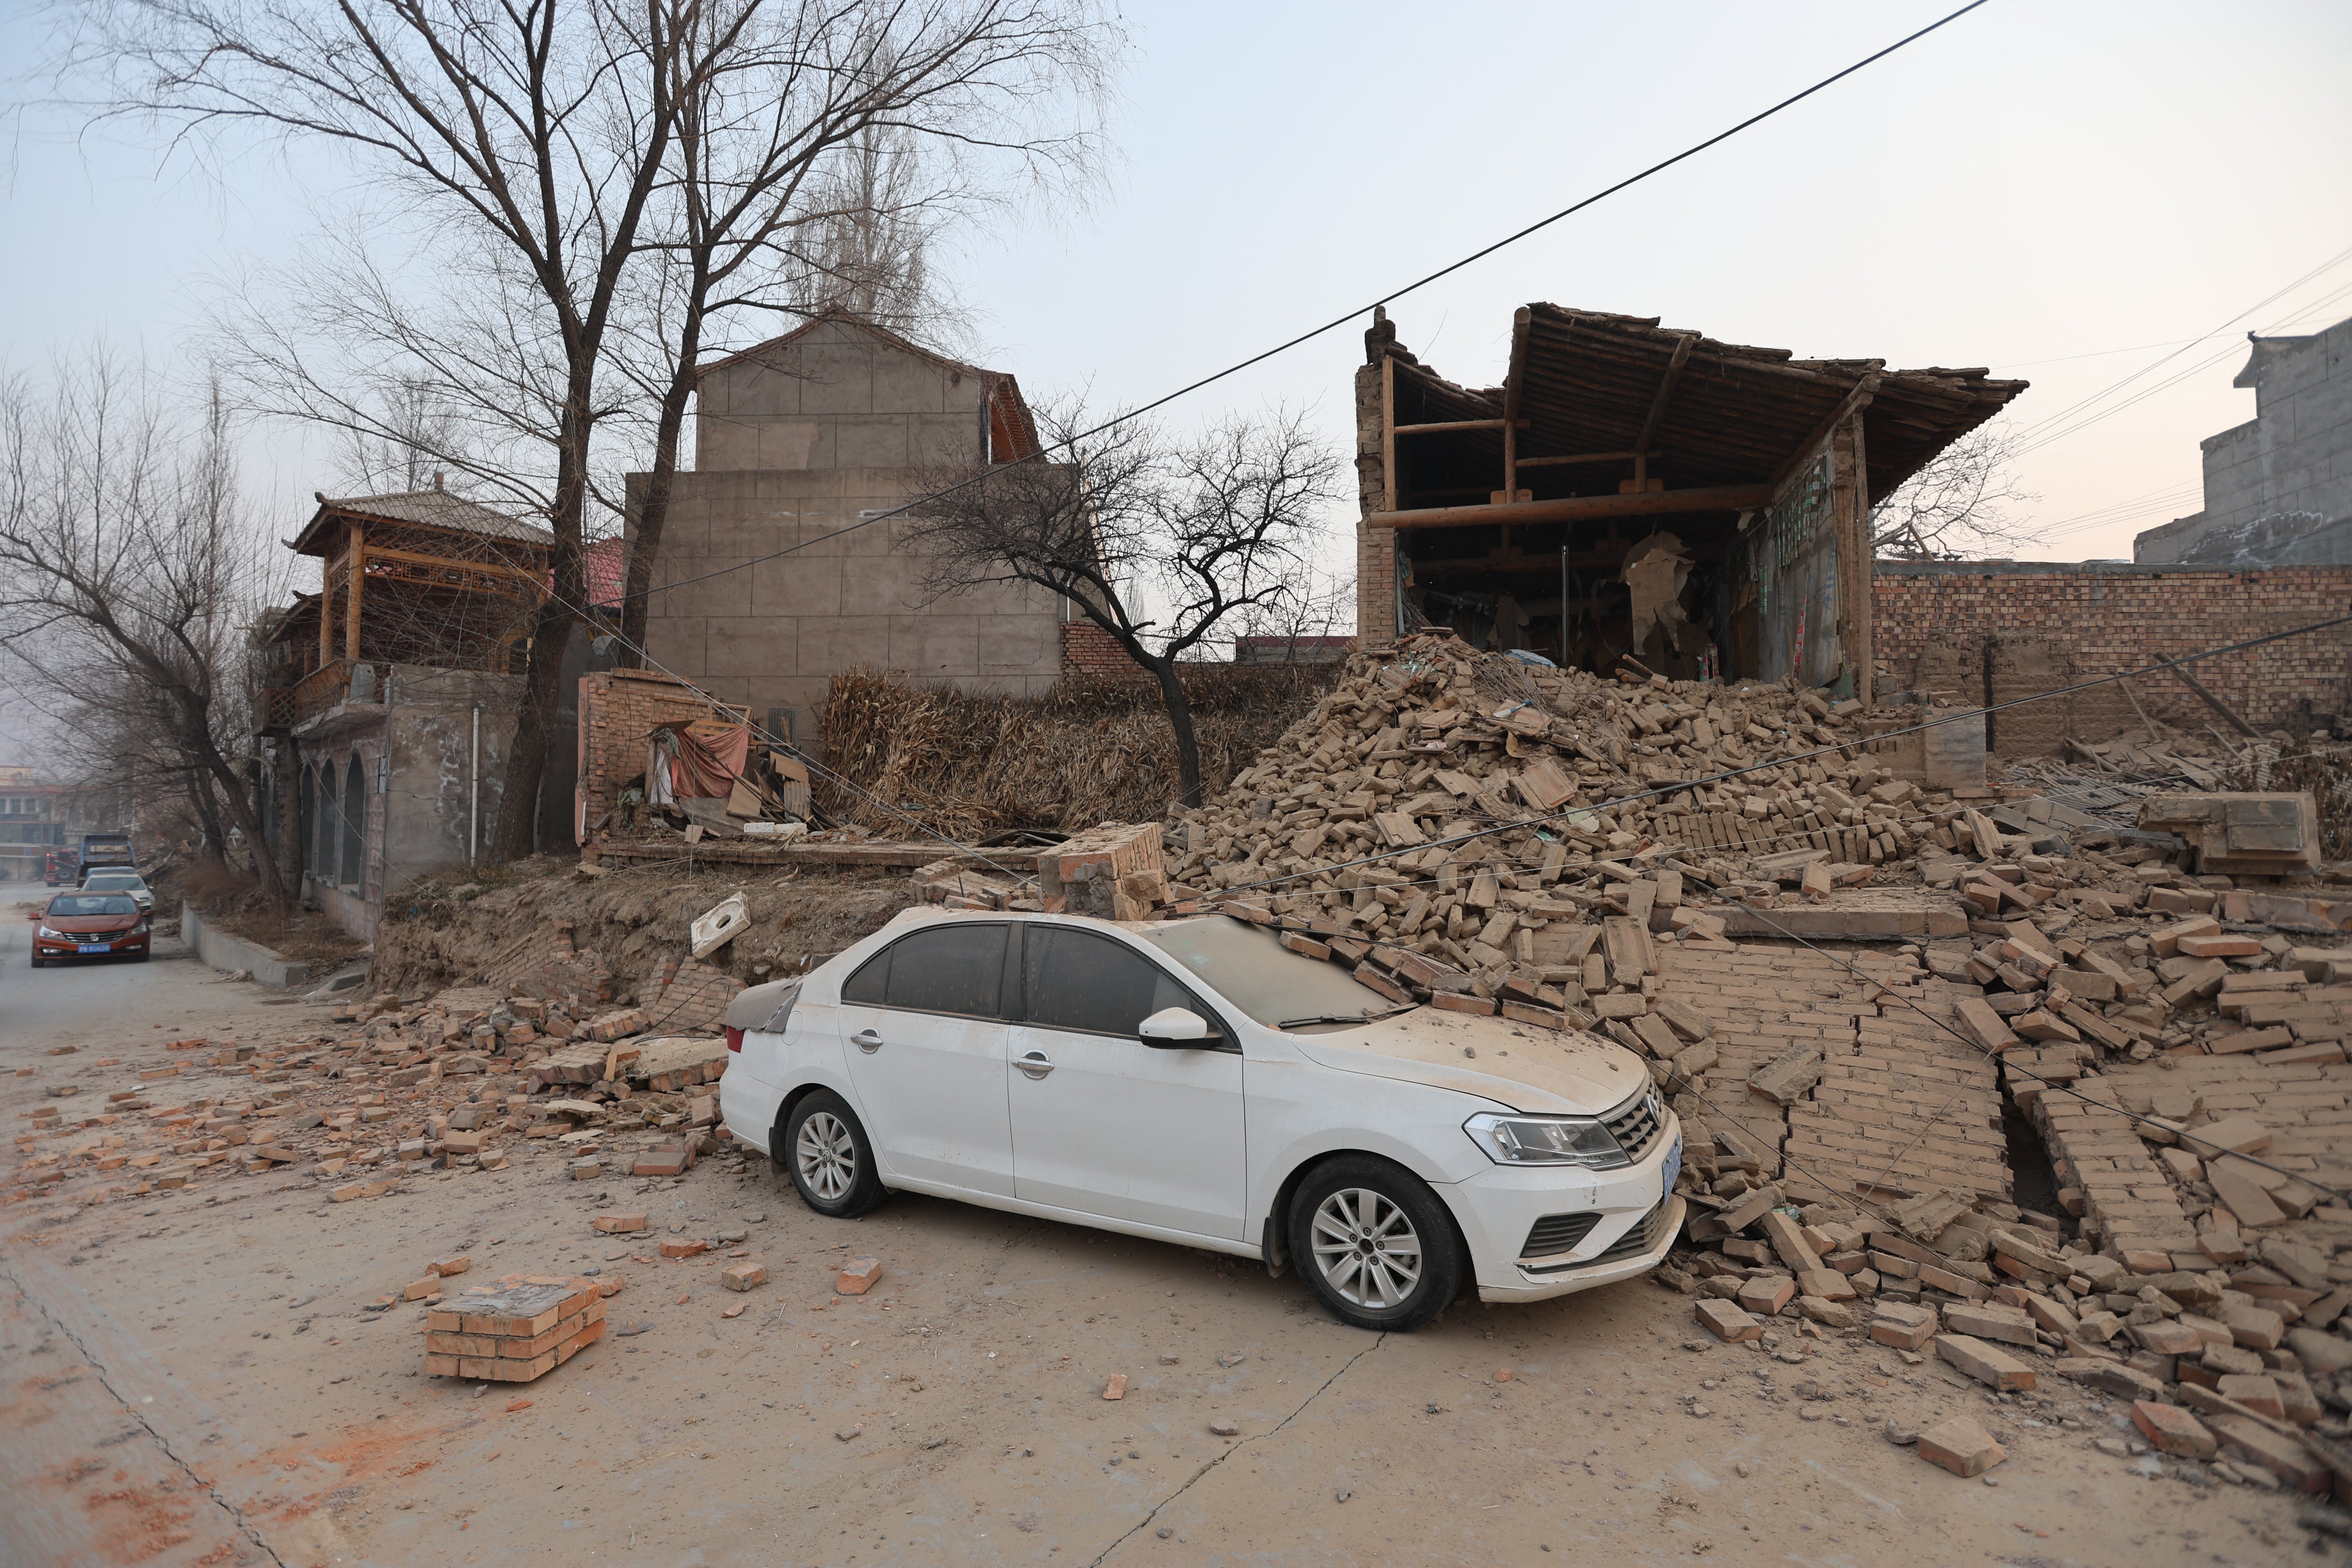 Collapsed buildings are seen after an earthquake in Dahejia